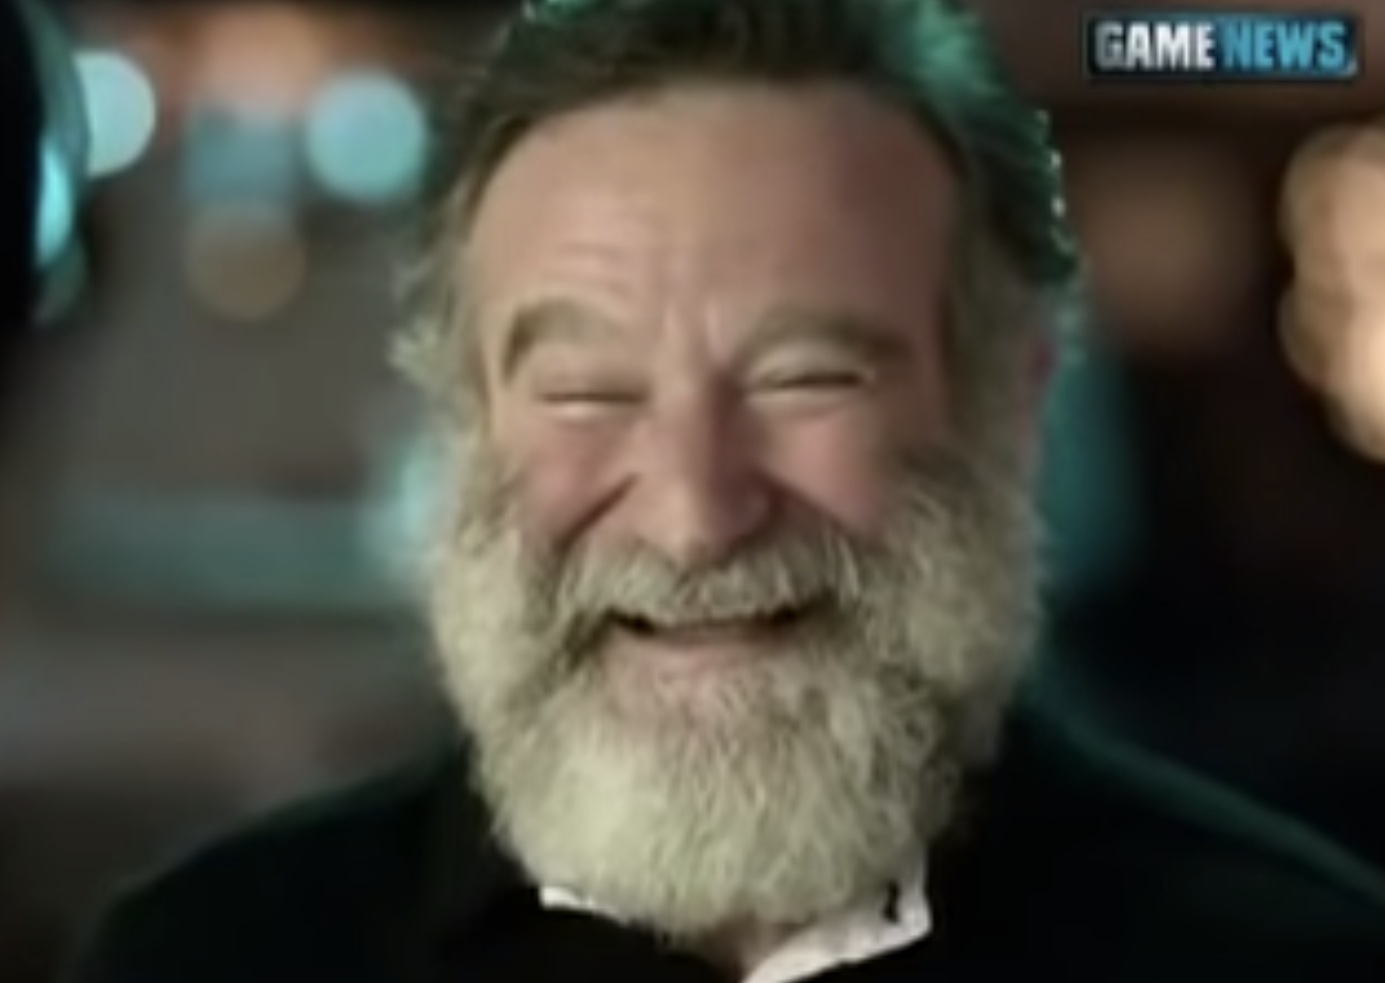 Robin Williams laughing happily in an interview with his daughter for Game News